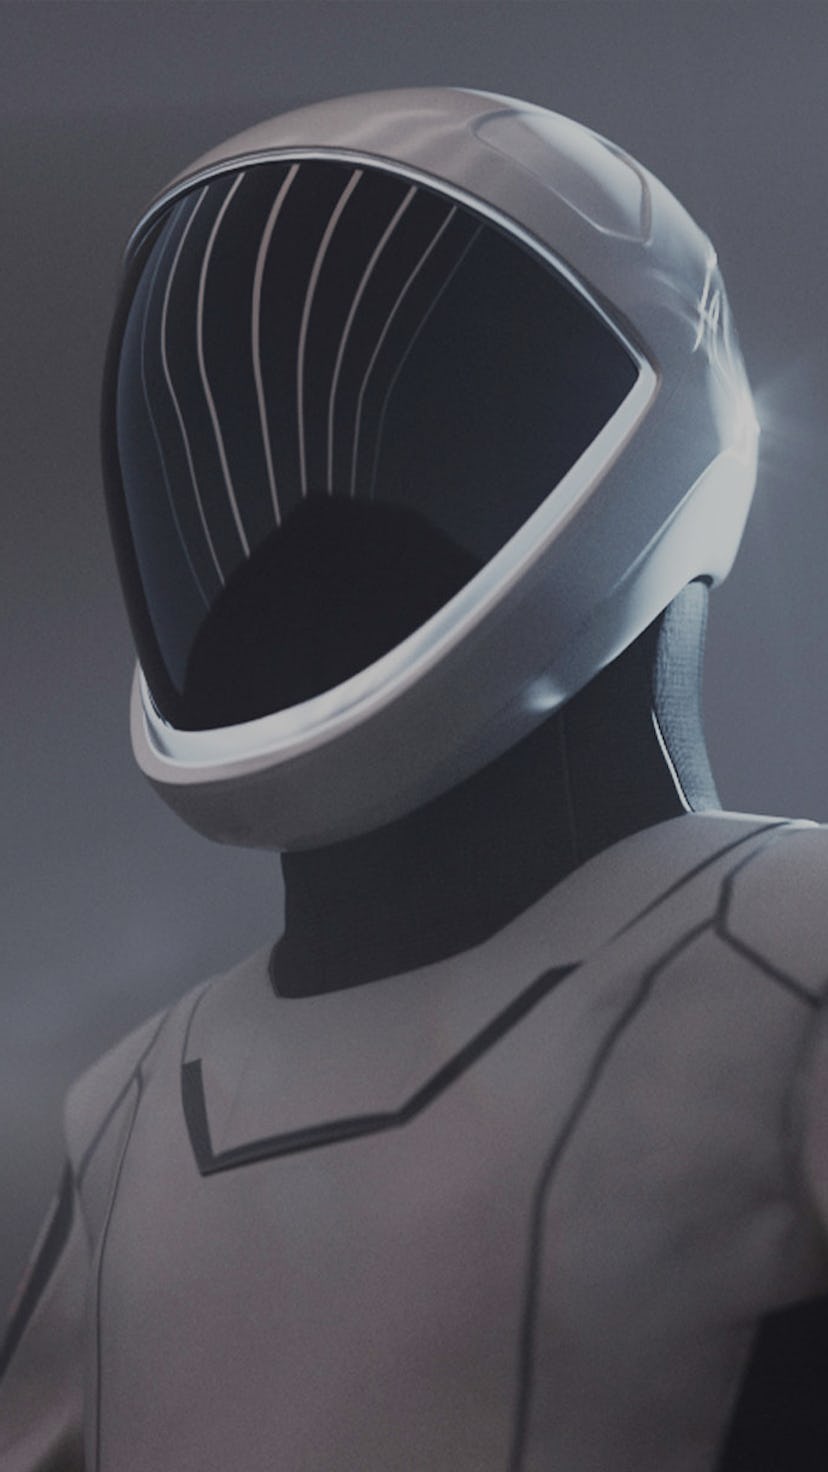 SpaceX spacesuit that the winners of the dearMoon contest will wear.